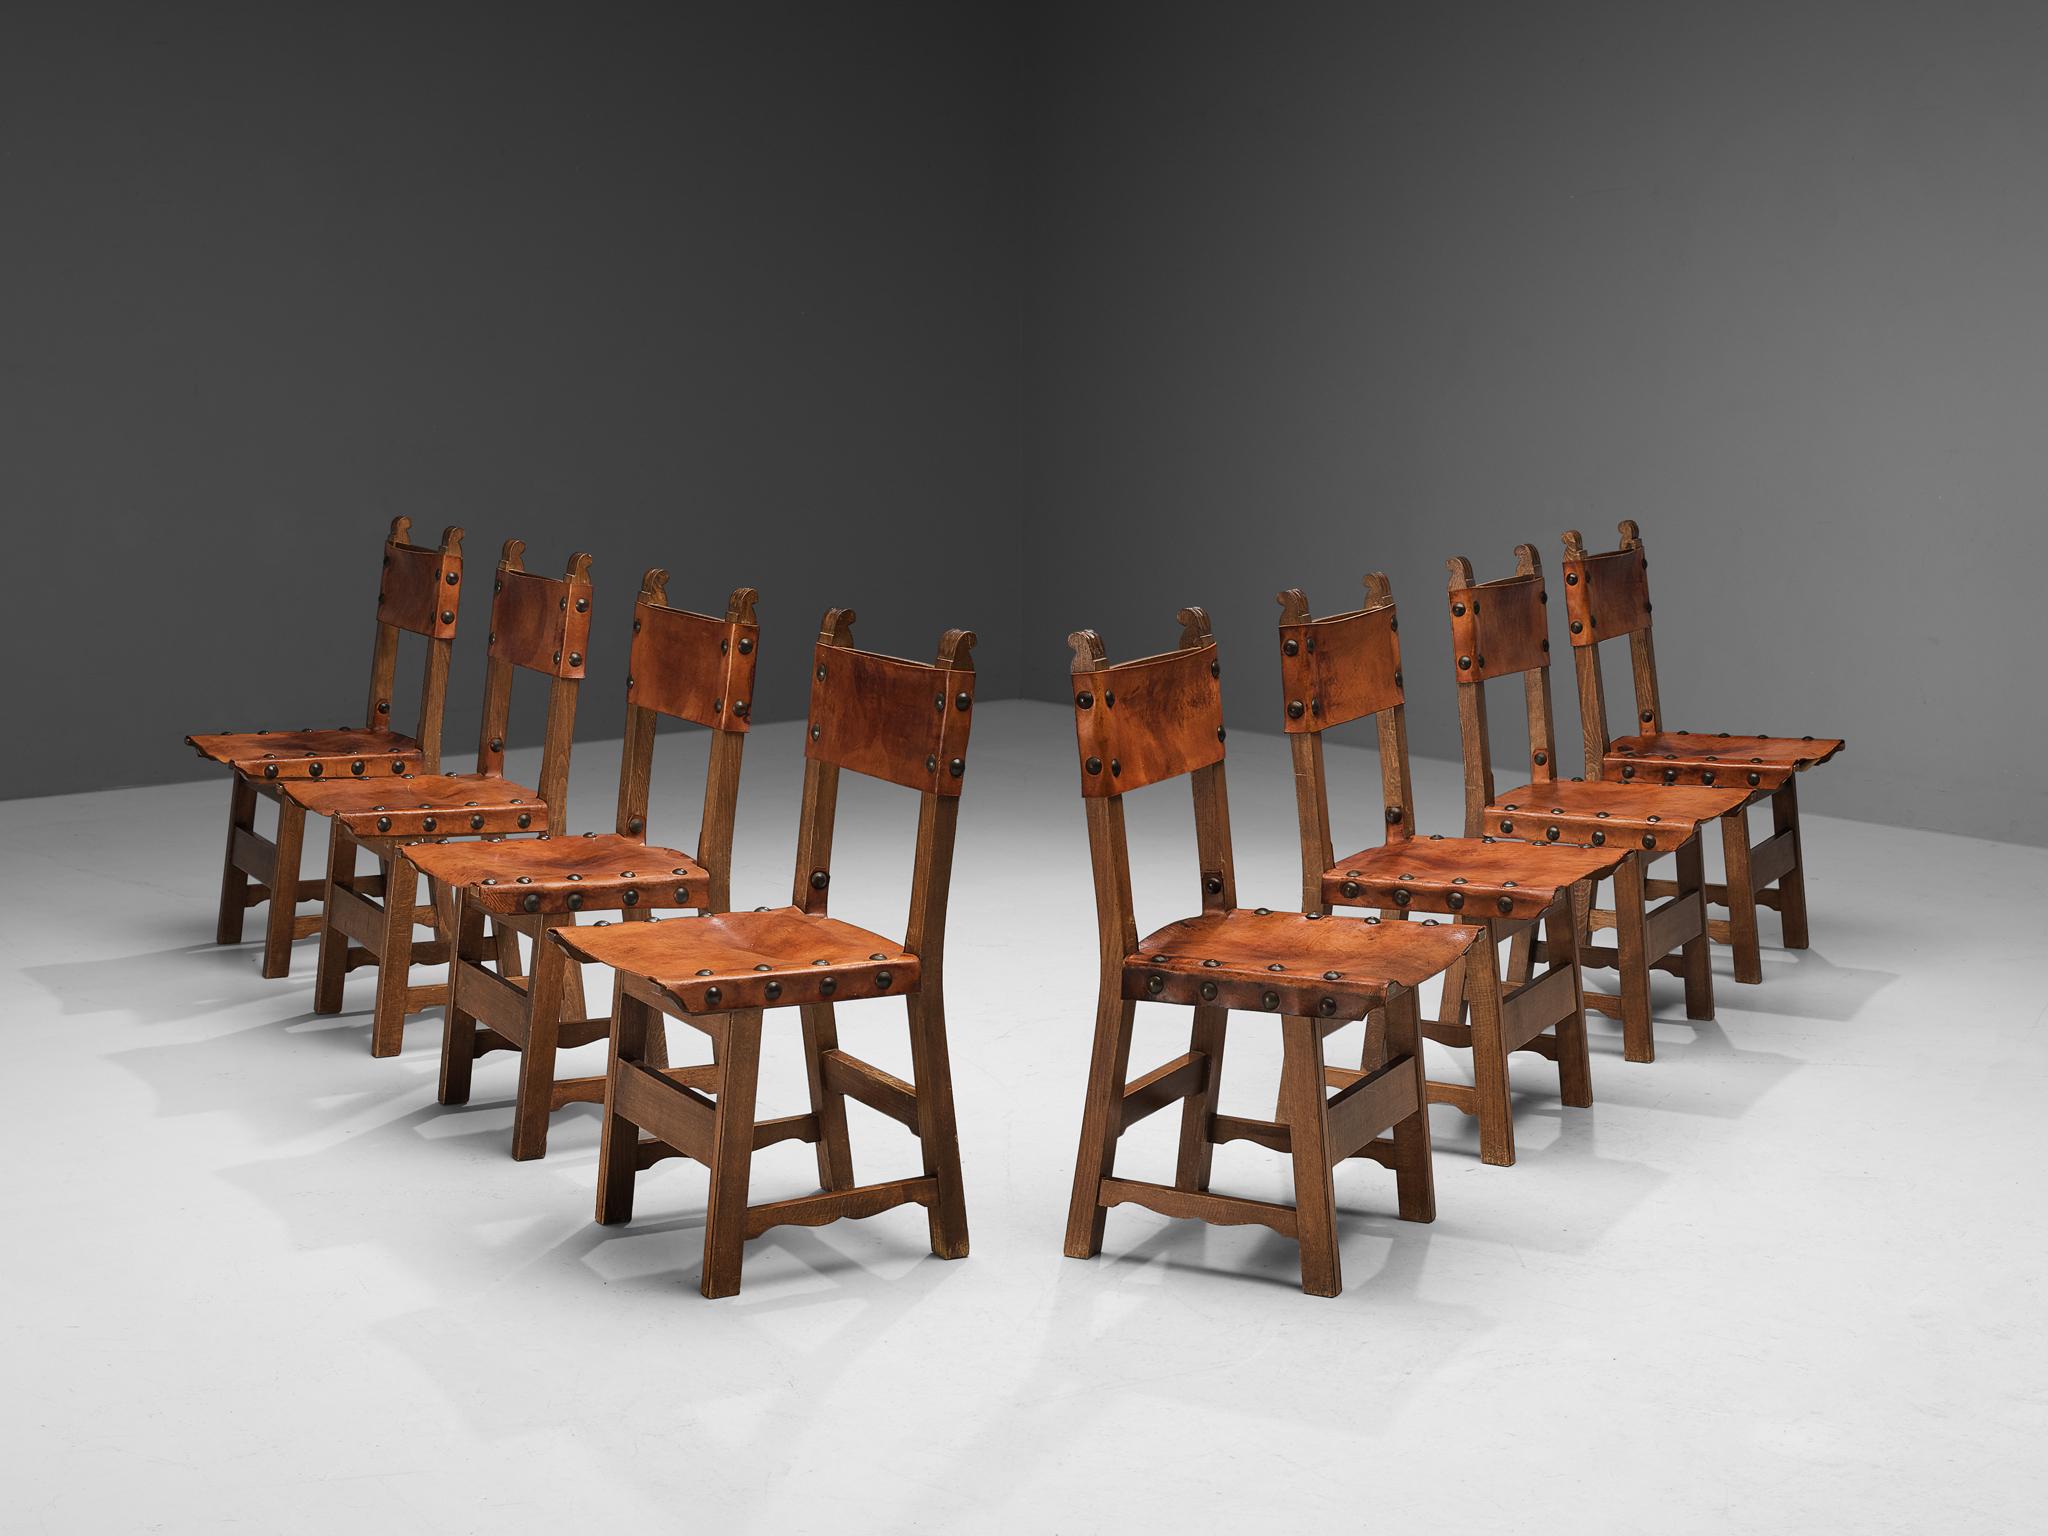 Dining chairs, saddle leather, oak, metal, Spain, 1960s

This set of eight Spanish dining chairs has a rustic yet distinct design. The beautiful oak wooden frame shows clear lines and an elegant organic touch is visible in the lower stretcher